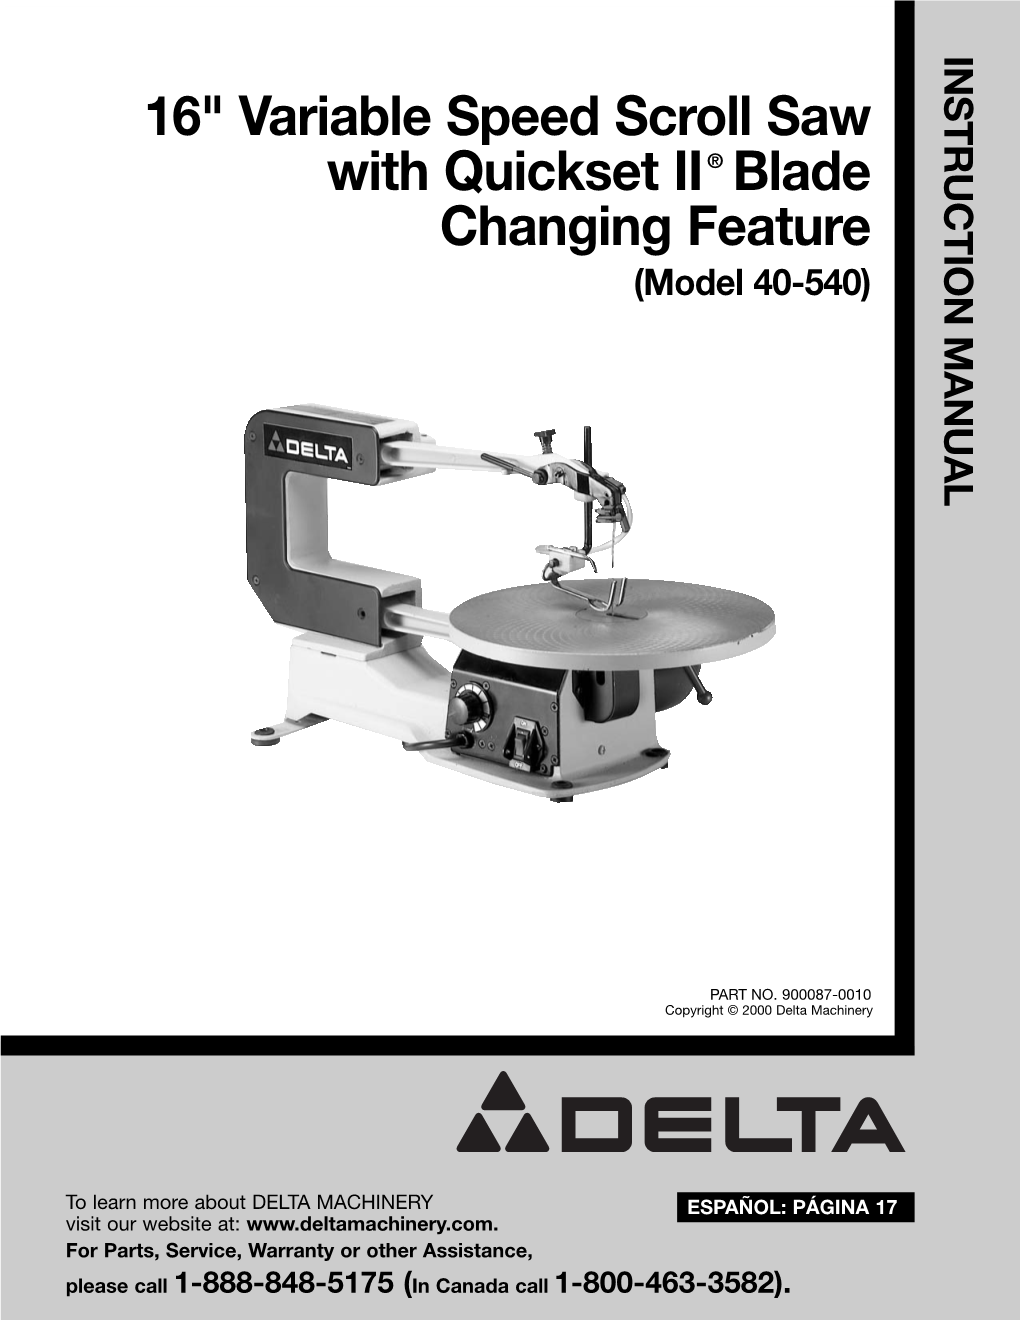 16" Variable Speed Scroll Saw with Quickset II Blade Changing Feature